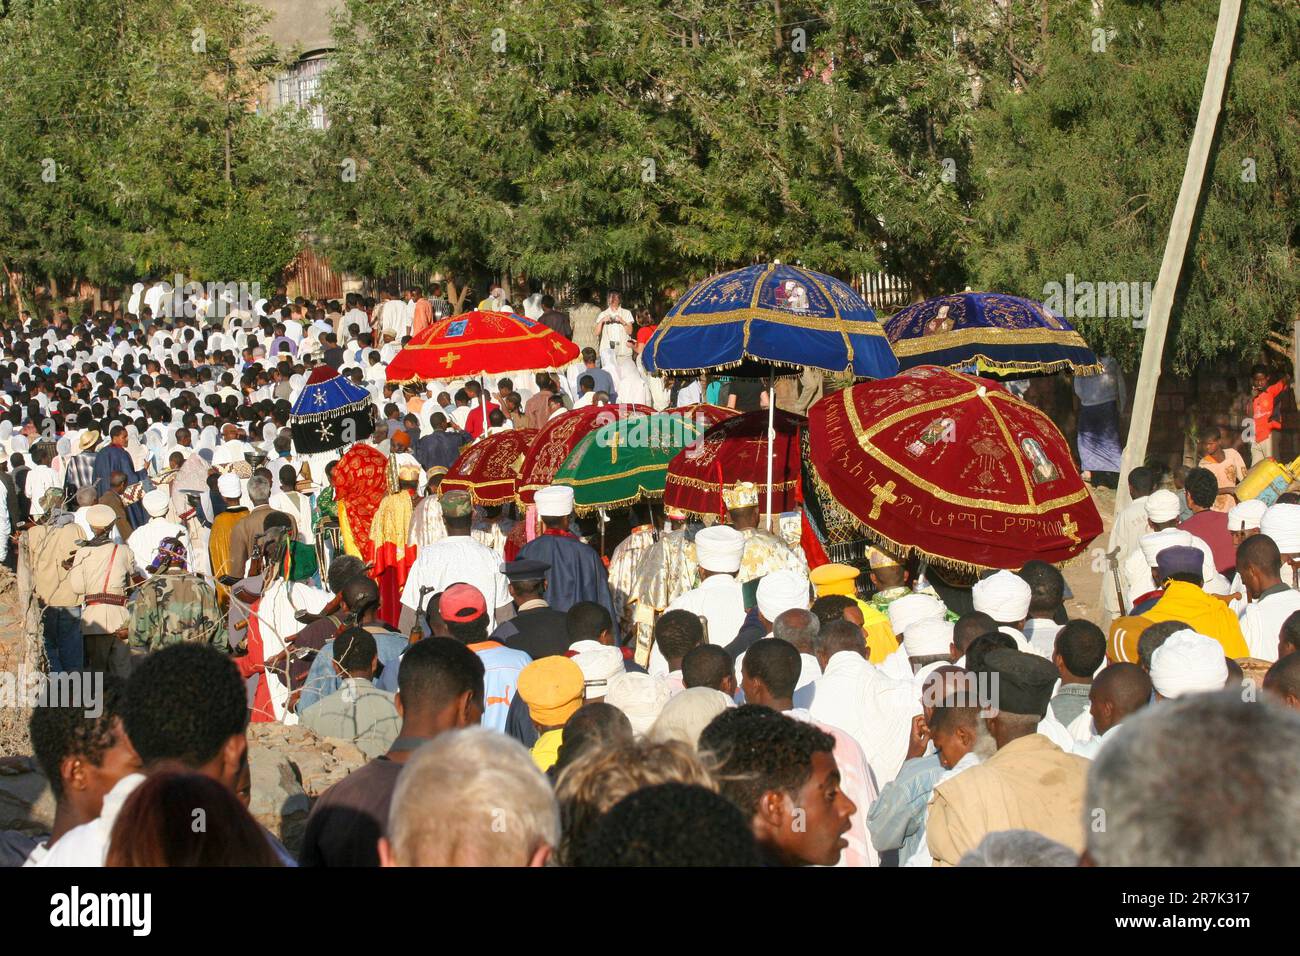 Ethiopia, Axum, The Church of Our Lady Mary of Zion said to houses the Biblical Ark of the Covenant The ark is brought out for the Timket ceremony (ce Stock Photo